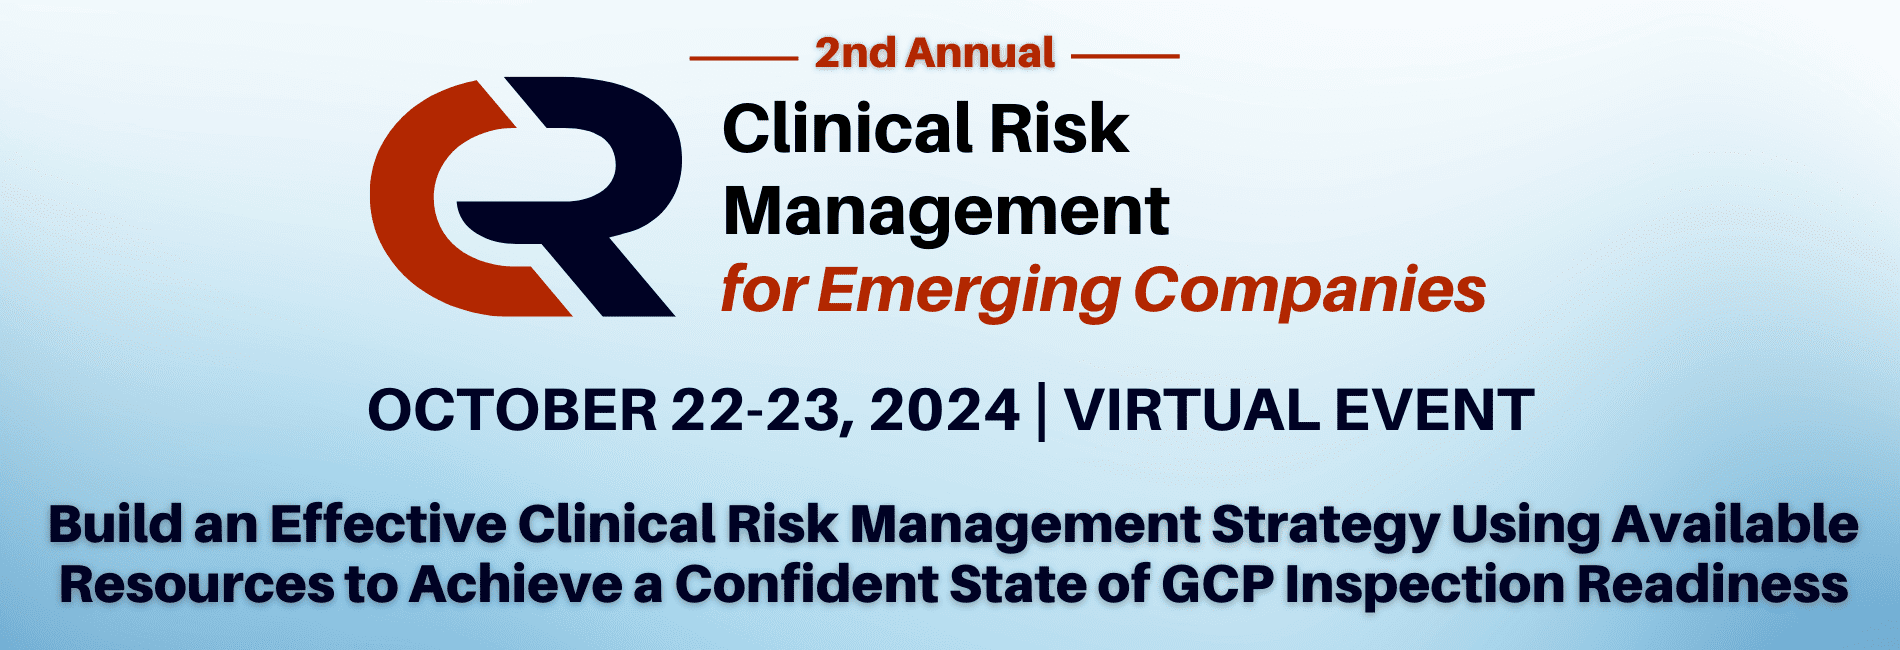 Hero Banner of Clinical Risk Management, October 22-23, 2024 | Virtual Event